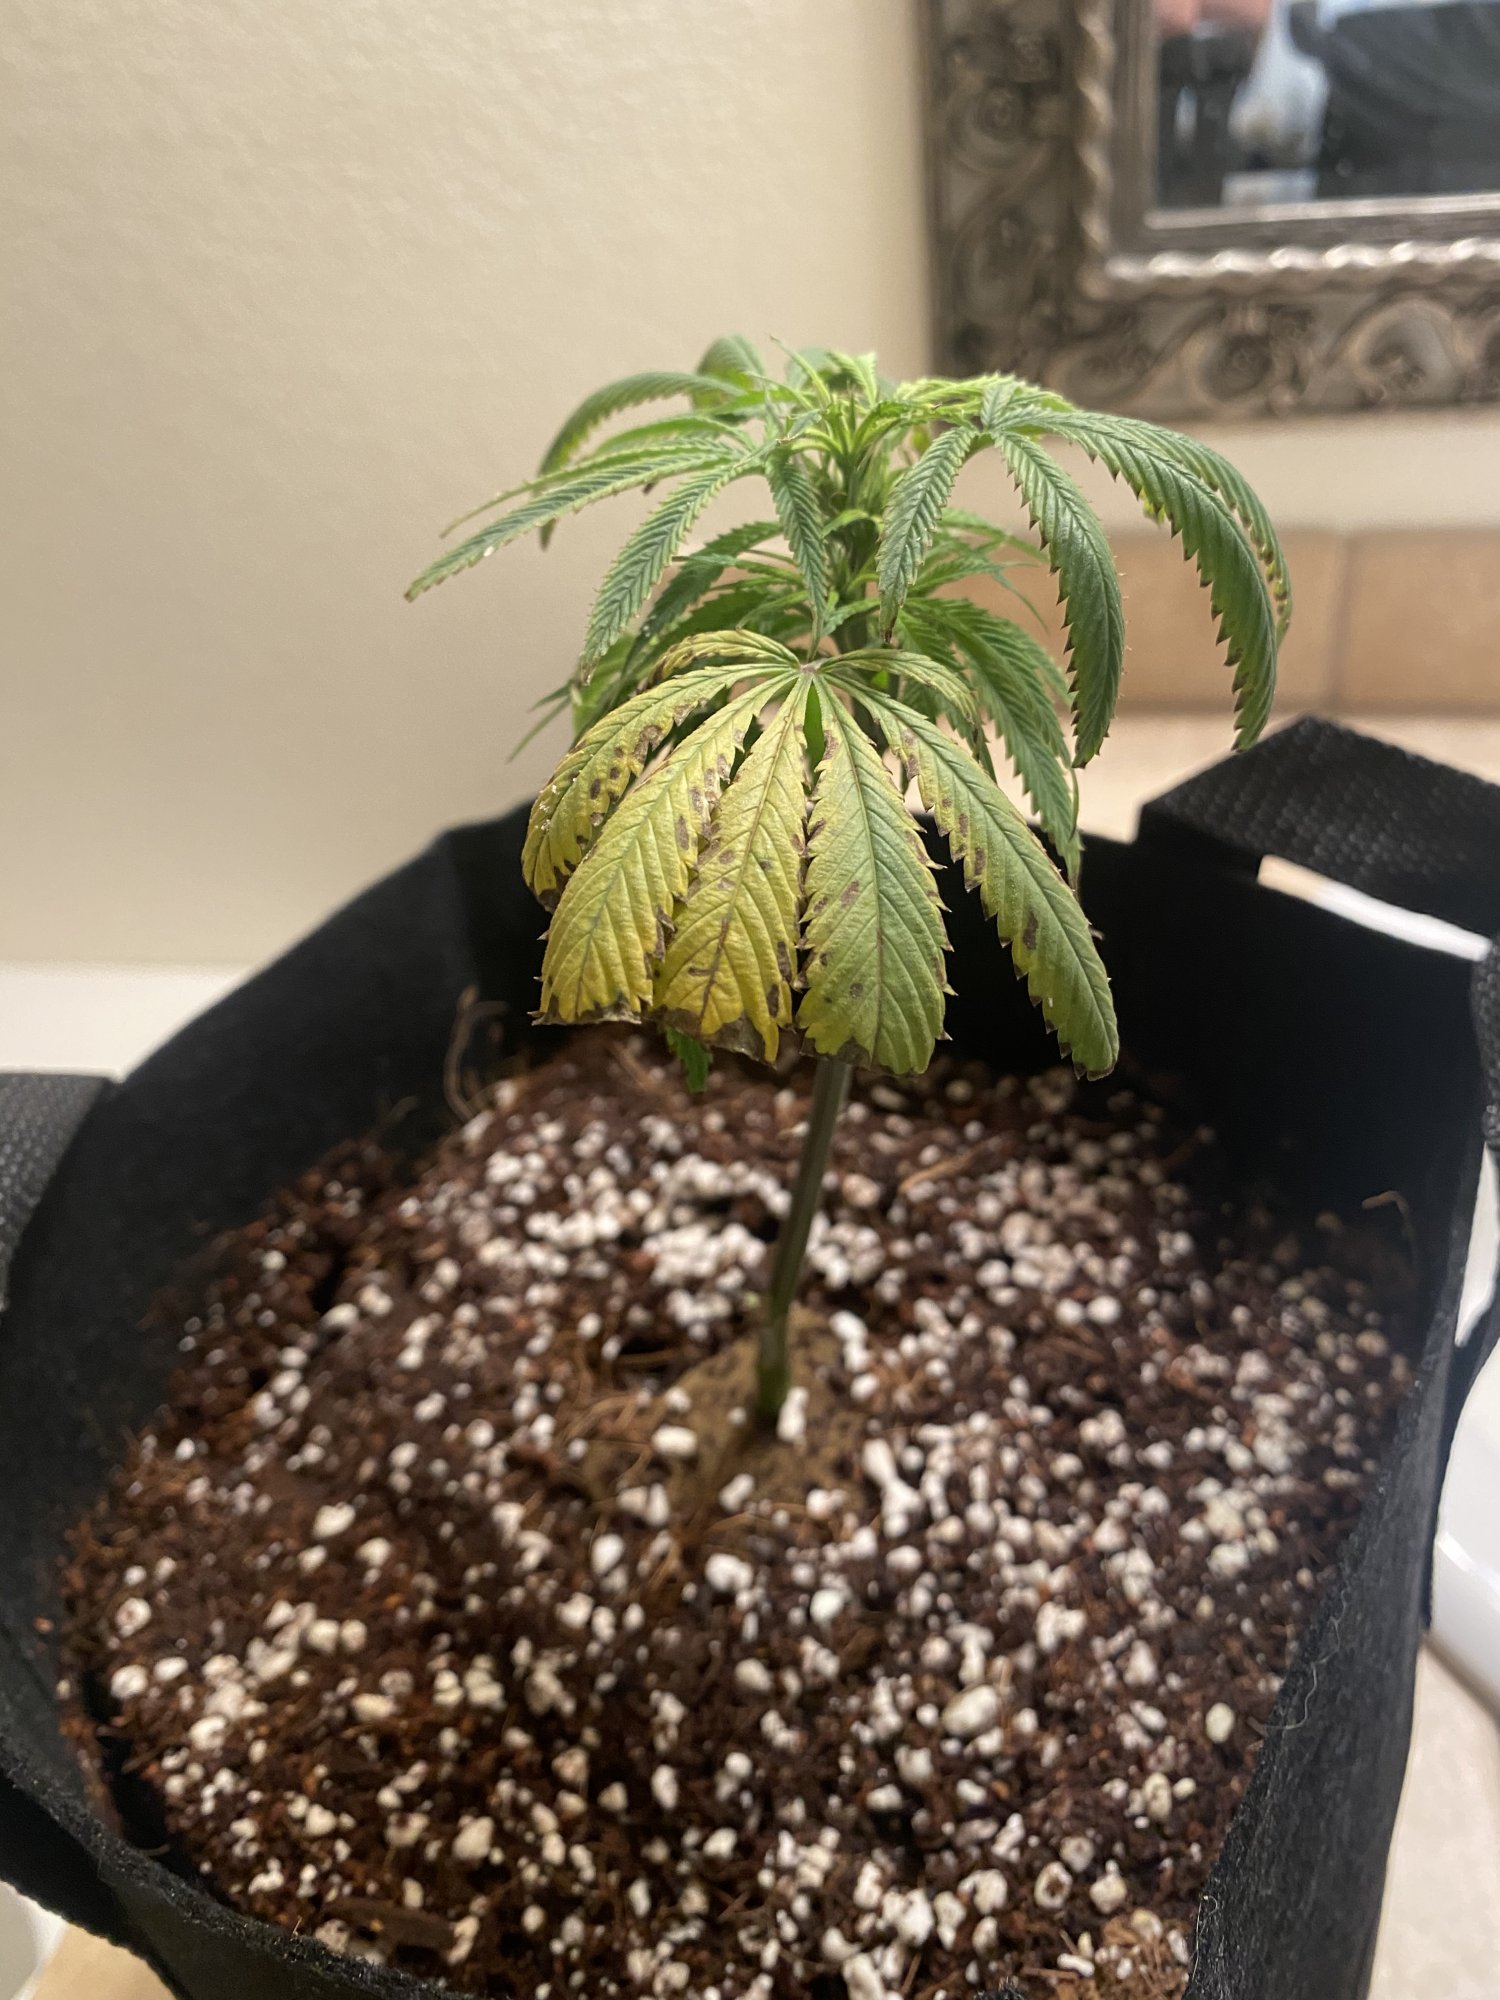 Help new to this and my ladies are sad